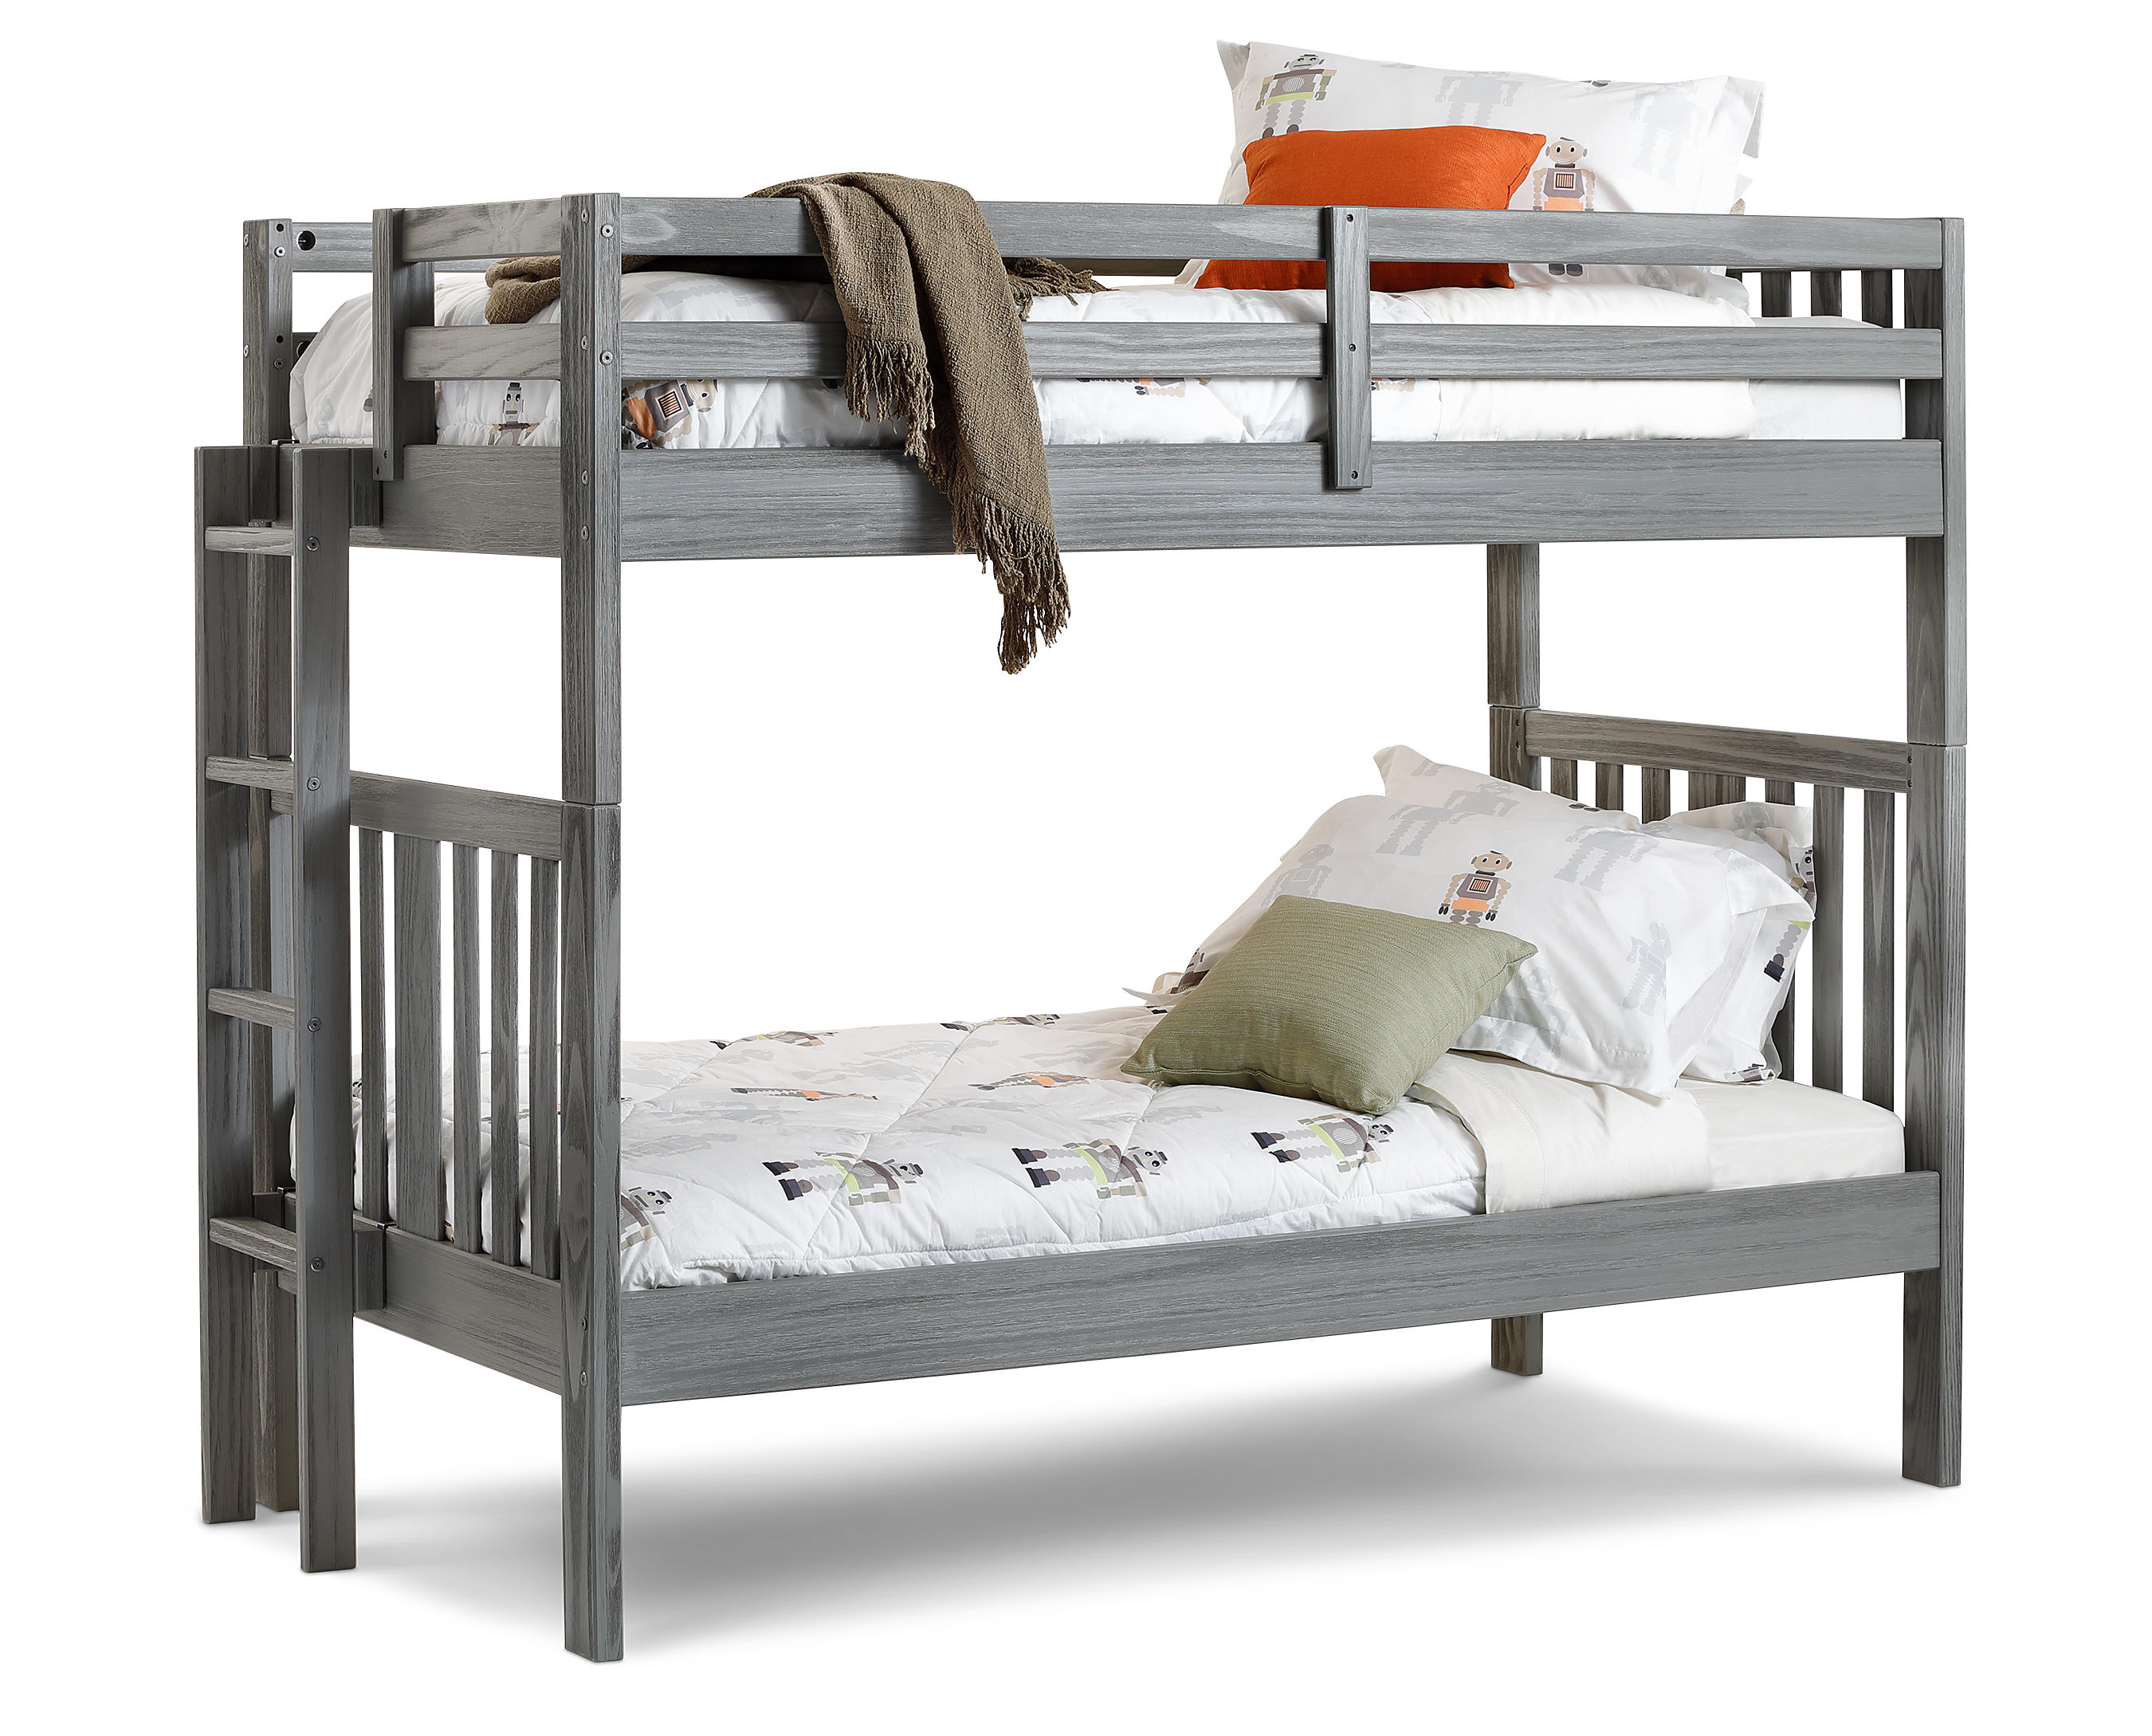 Dove Bunk Bed With Ladder Furniture Row, Bunk Beds Denver